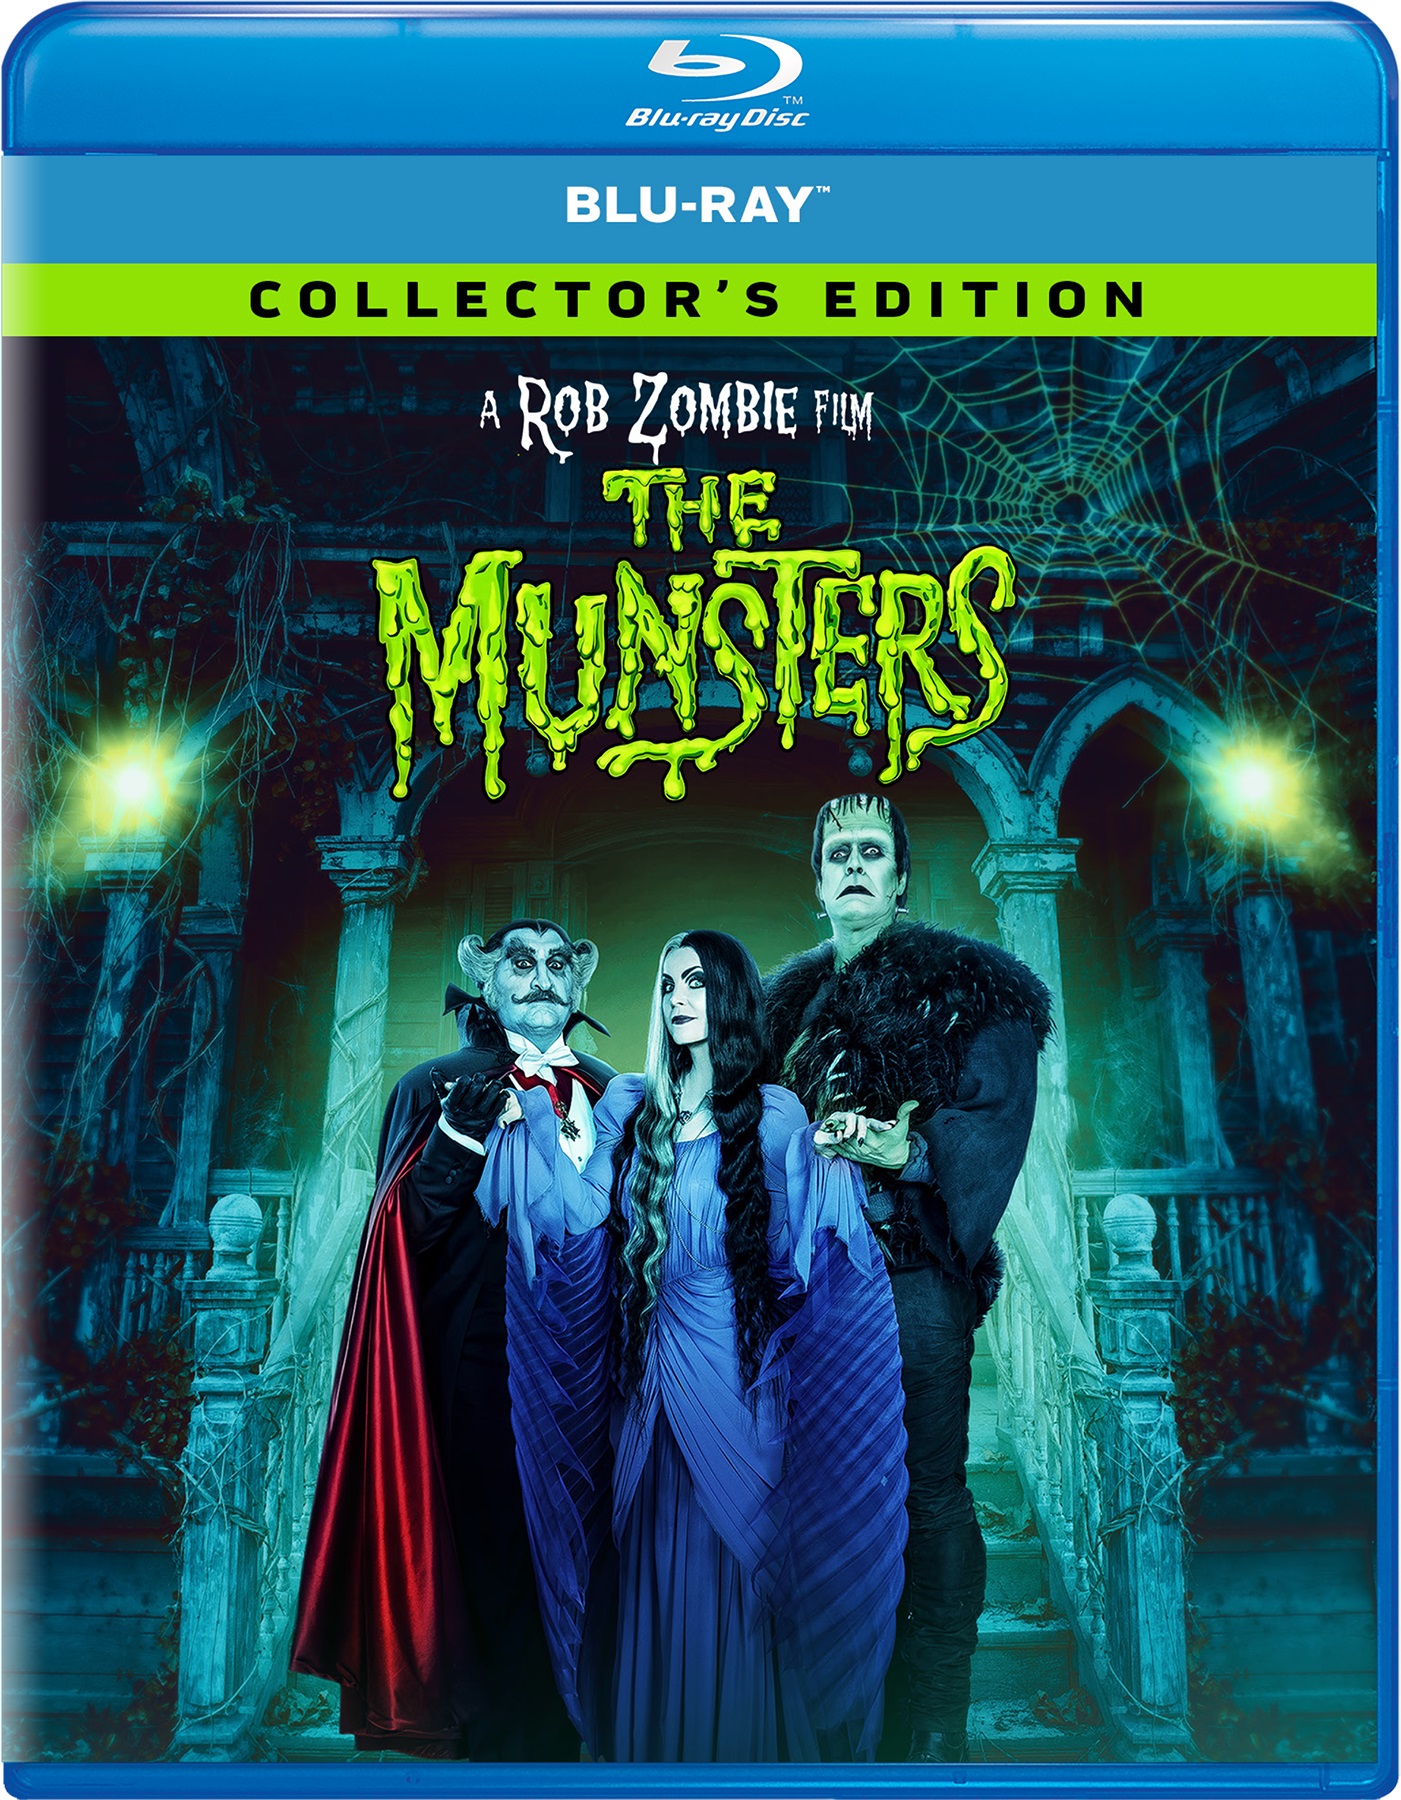 The Munsters (Blu-ray Collector's Edition) - Blu-ray [ 2022 ]  - Comedy Movies On Blu-ray - Movies On GRUV